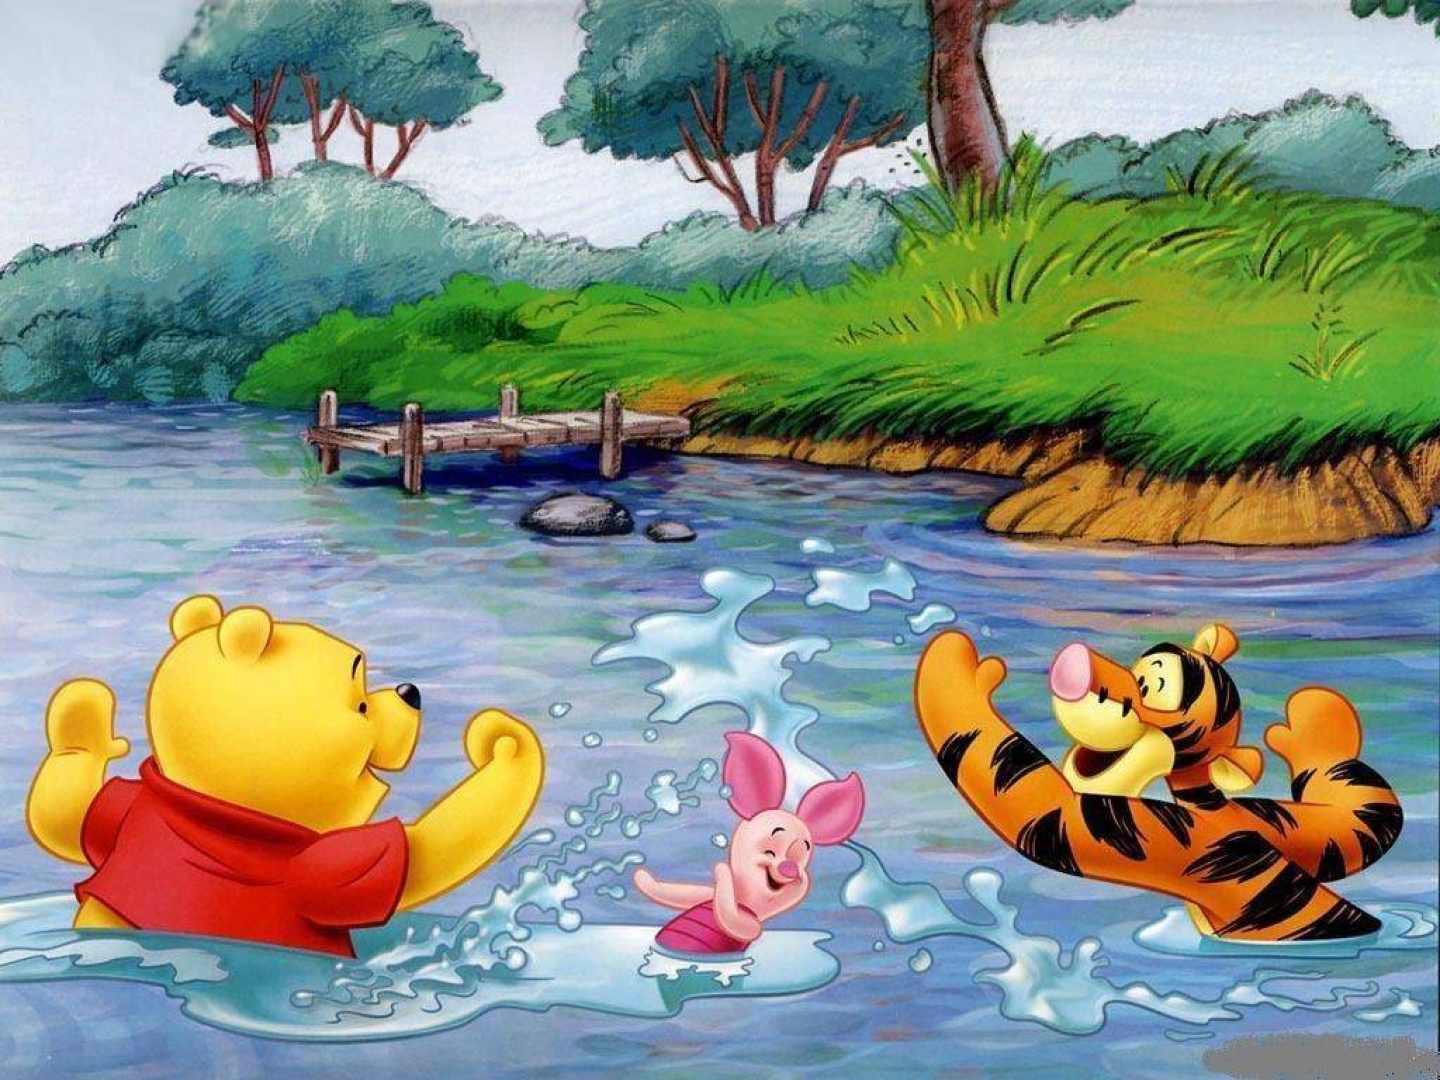 TV Show Winnie The Pooh HD Wallpaper Background Image.